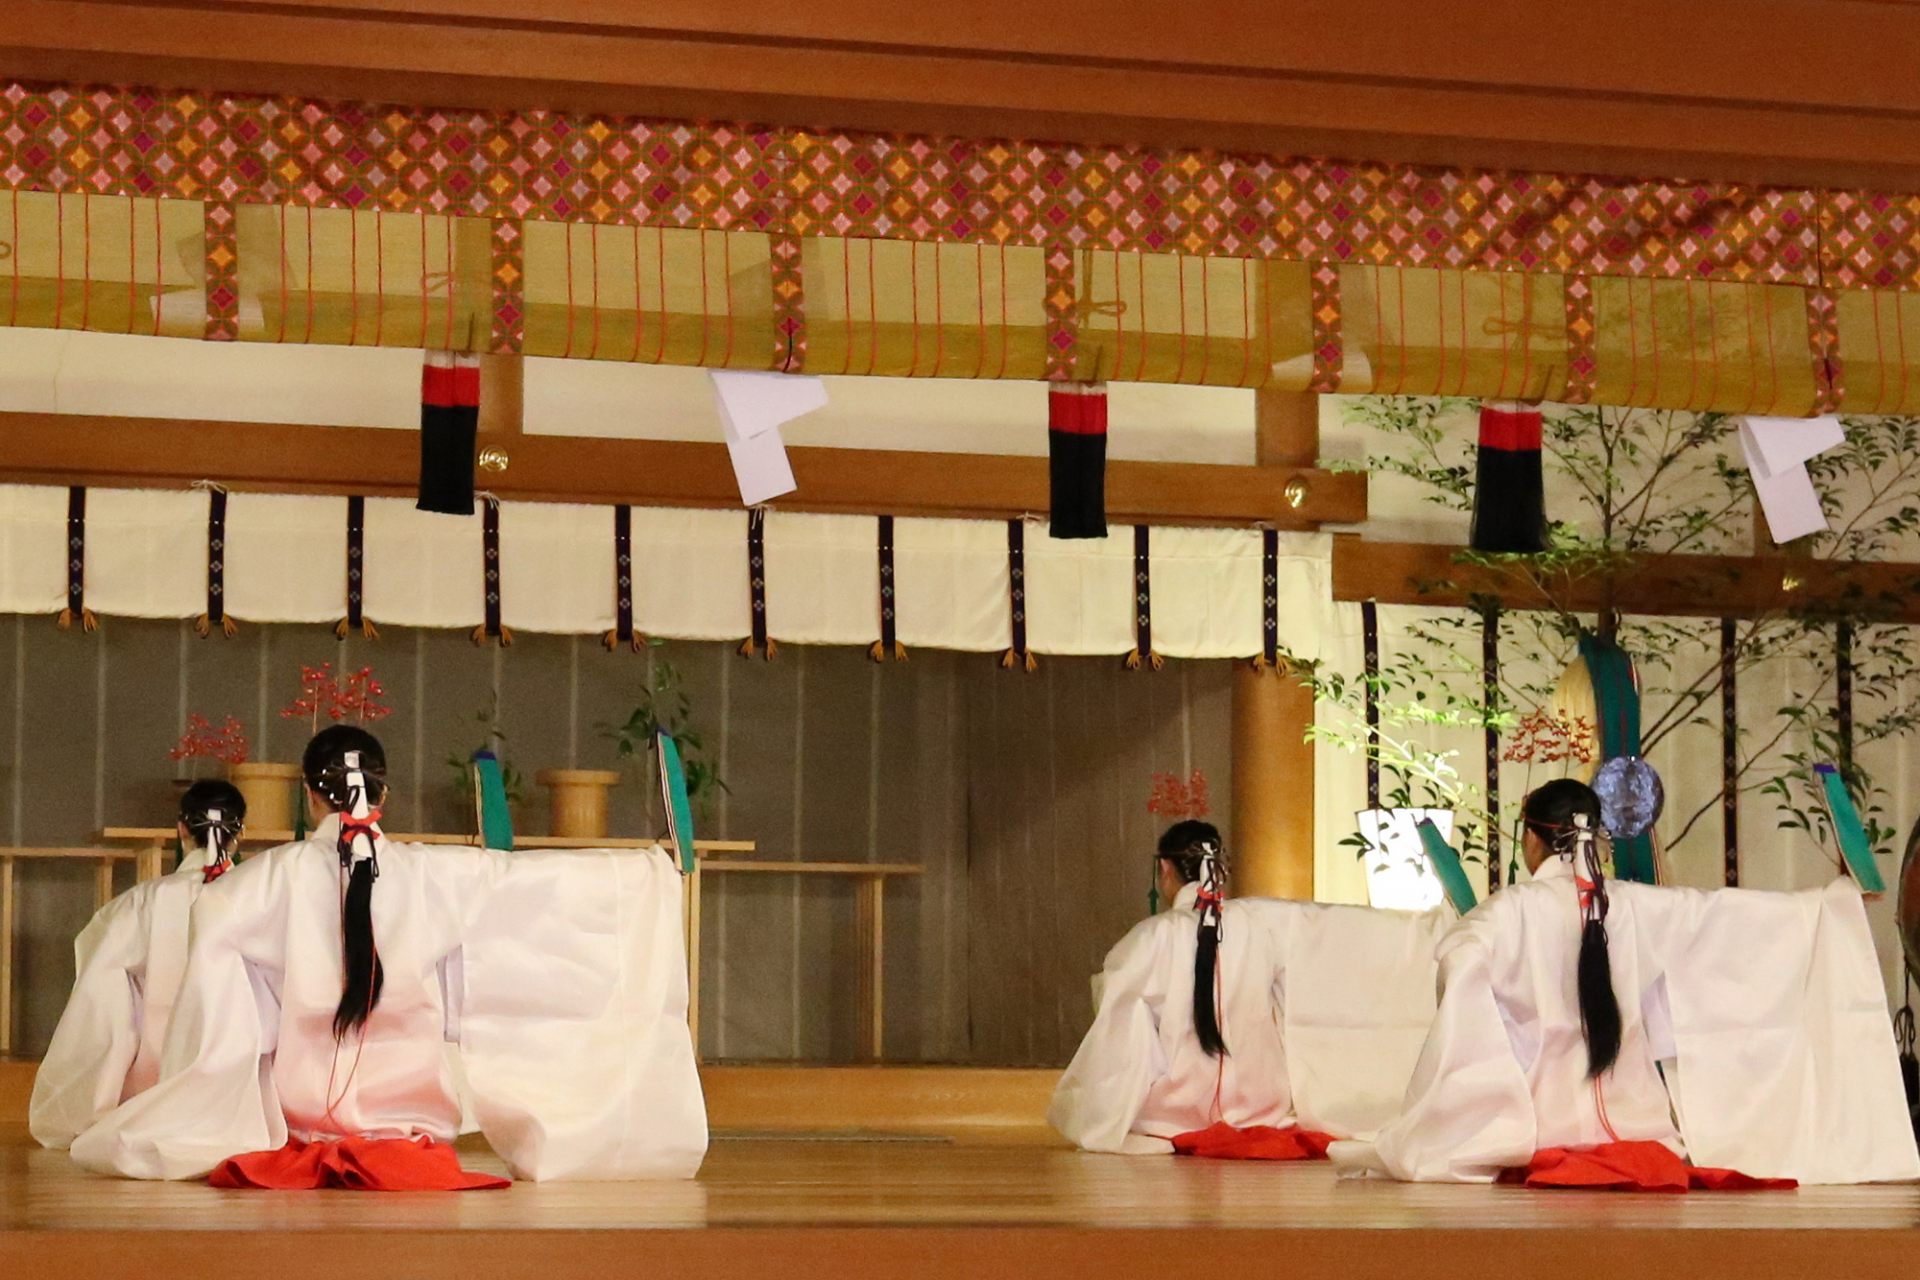 The miko (shrine maidens) dedicate a traditional dance called Yamatomai as part of the service, in a kagura prayer.
（c）JINJA SHICHO
